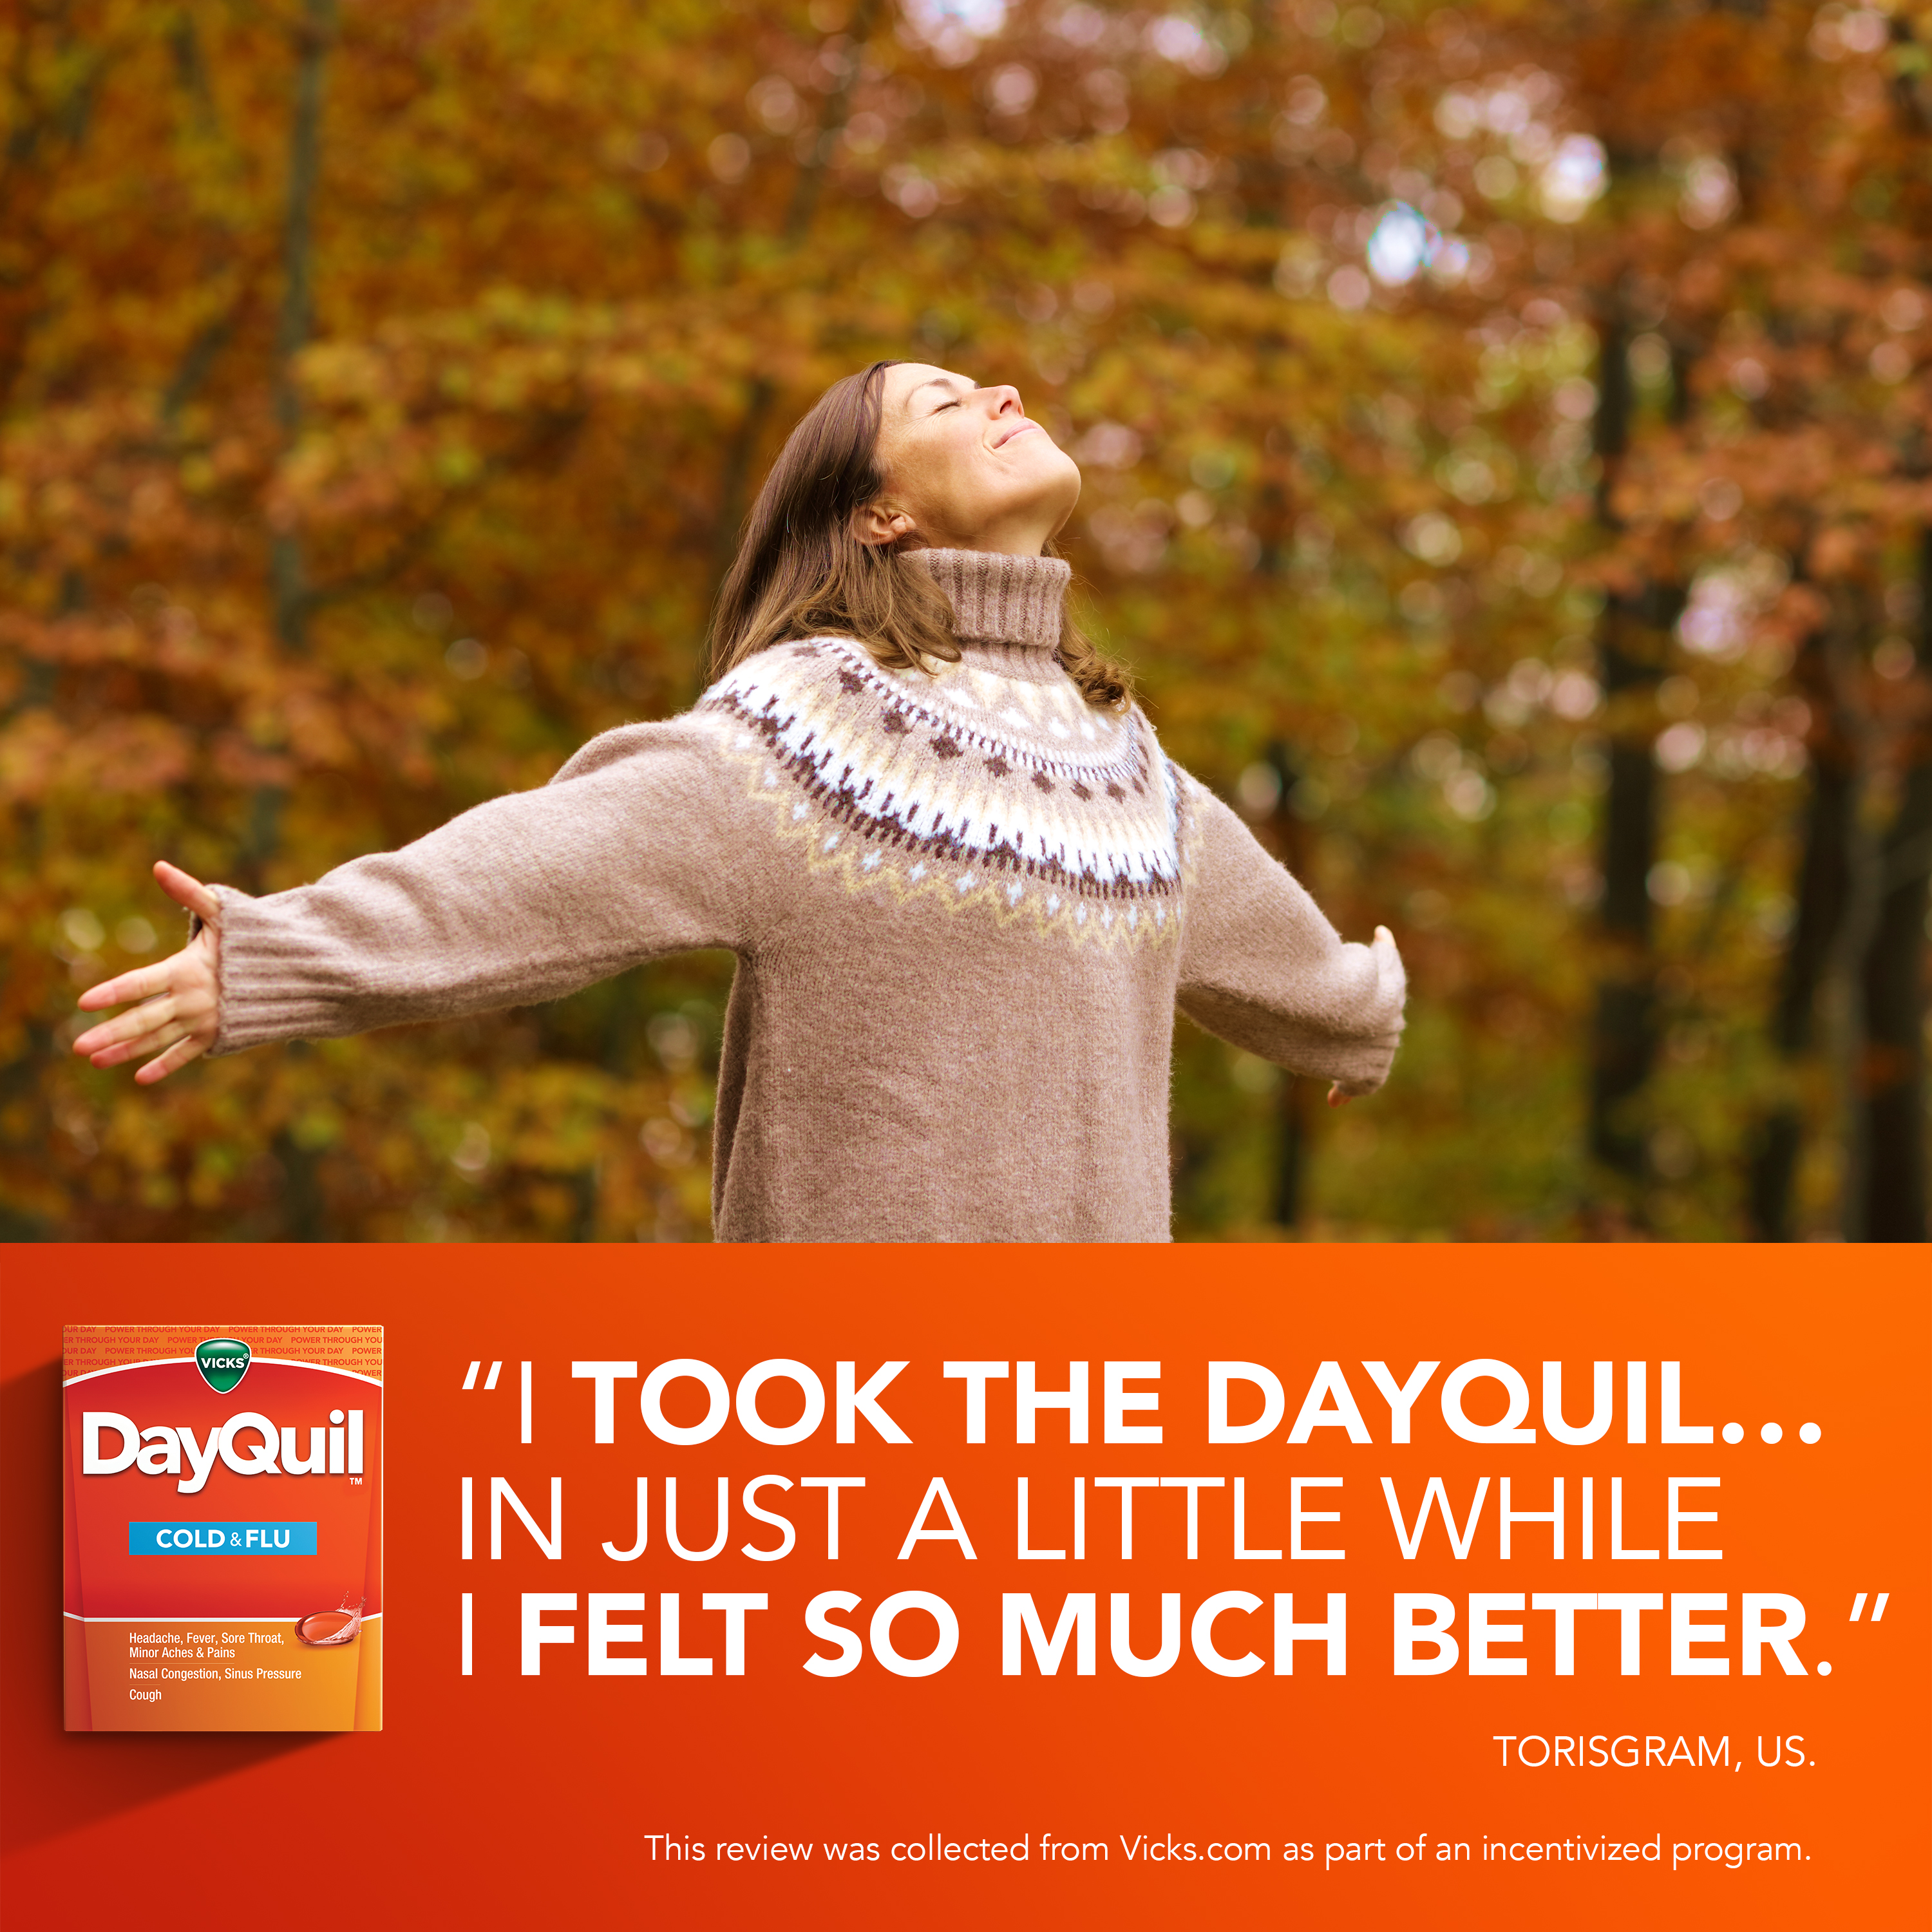 I took the Dayquil, In just a little while I felt so much better